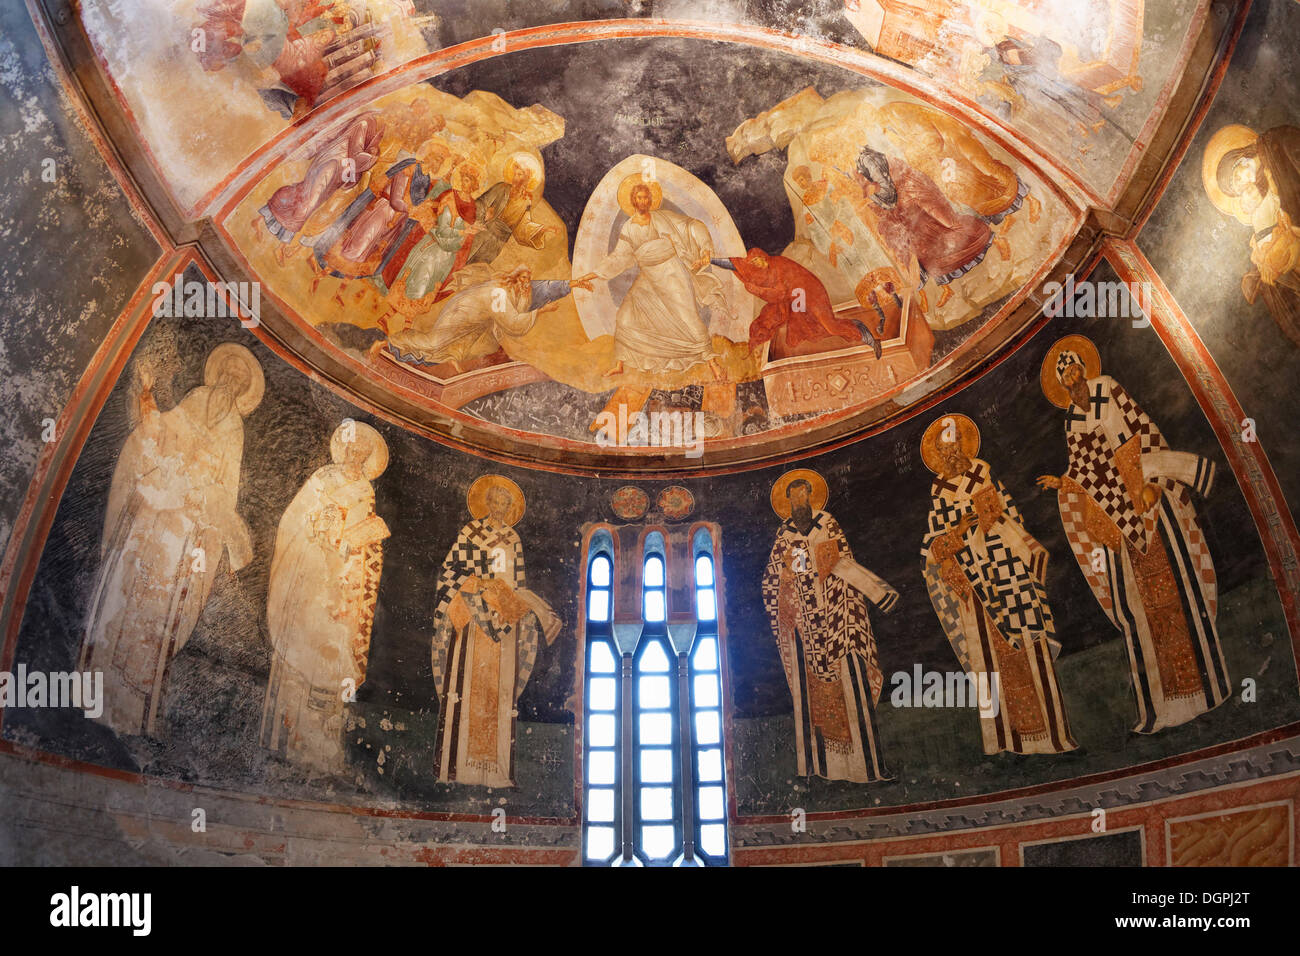 Anastasis fresco and Church Fathers wearing bishop's robes in the Parekklesion or Funeral Chapel, Chora Church or Kariye Camii Stock Photo